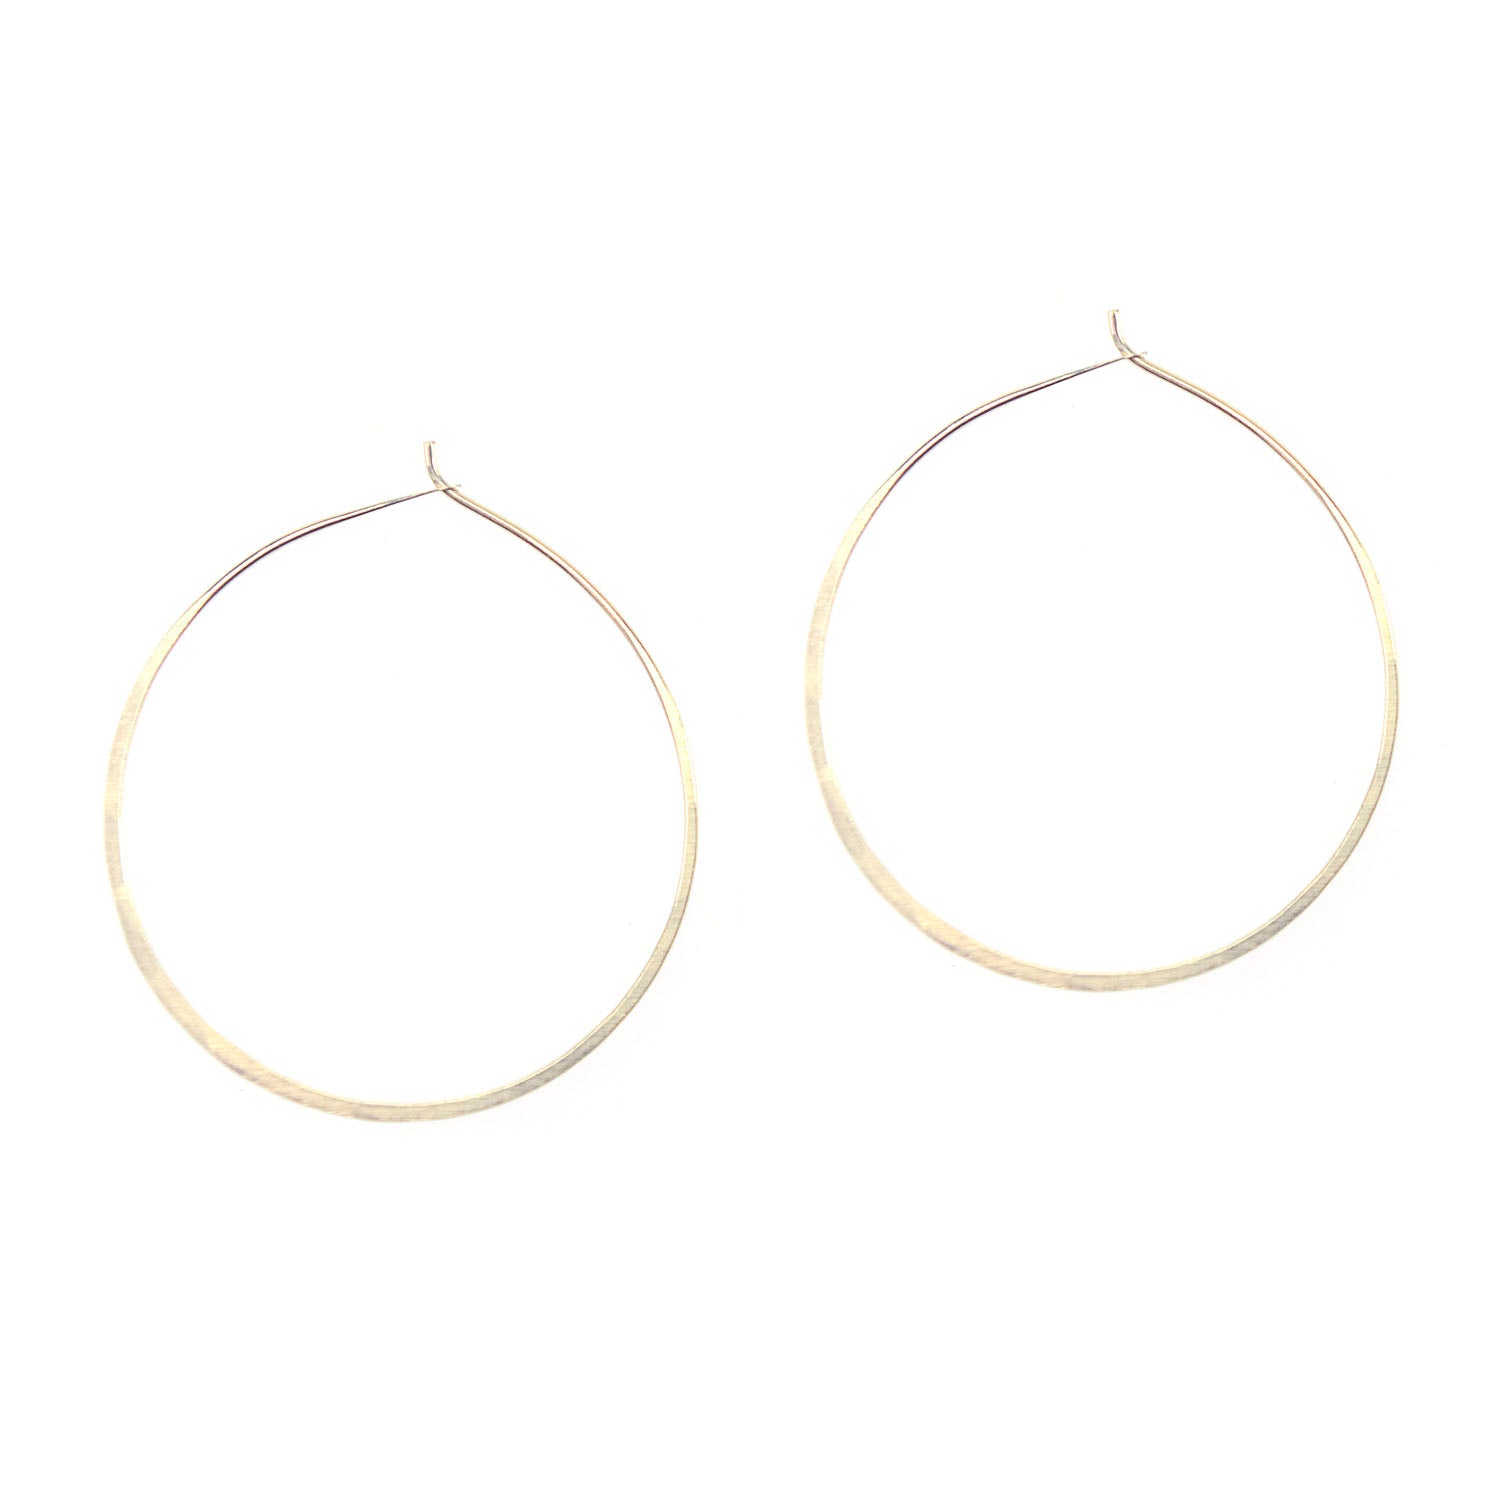 How To Make Wire Hoop Earrings & Customise Them